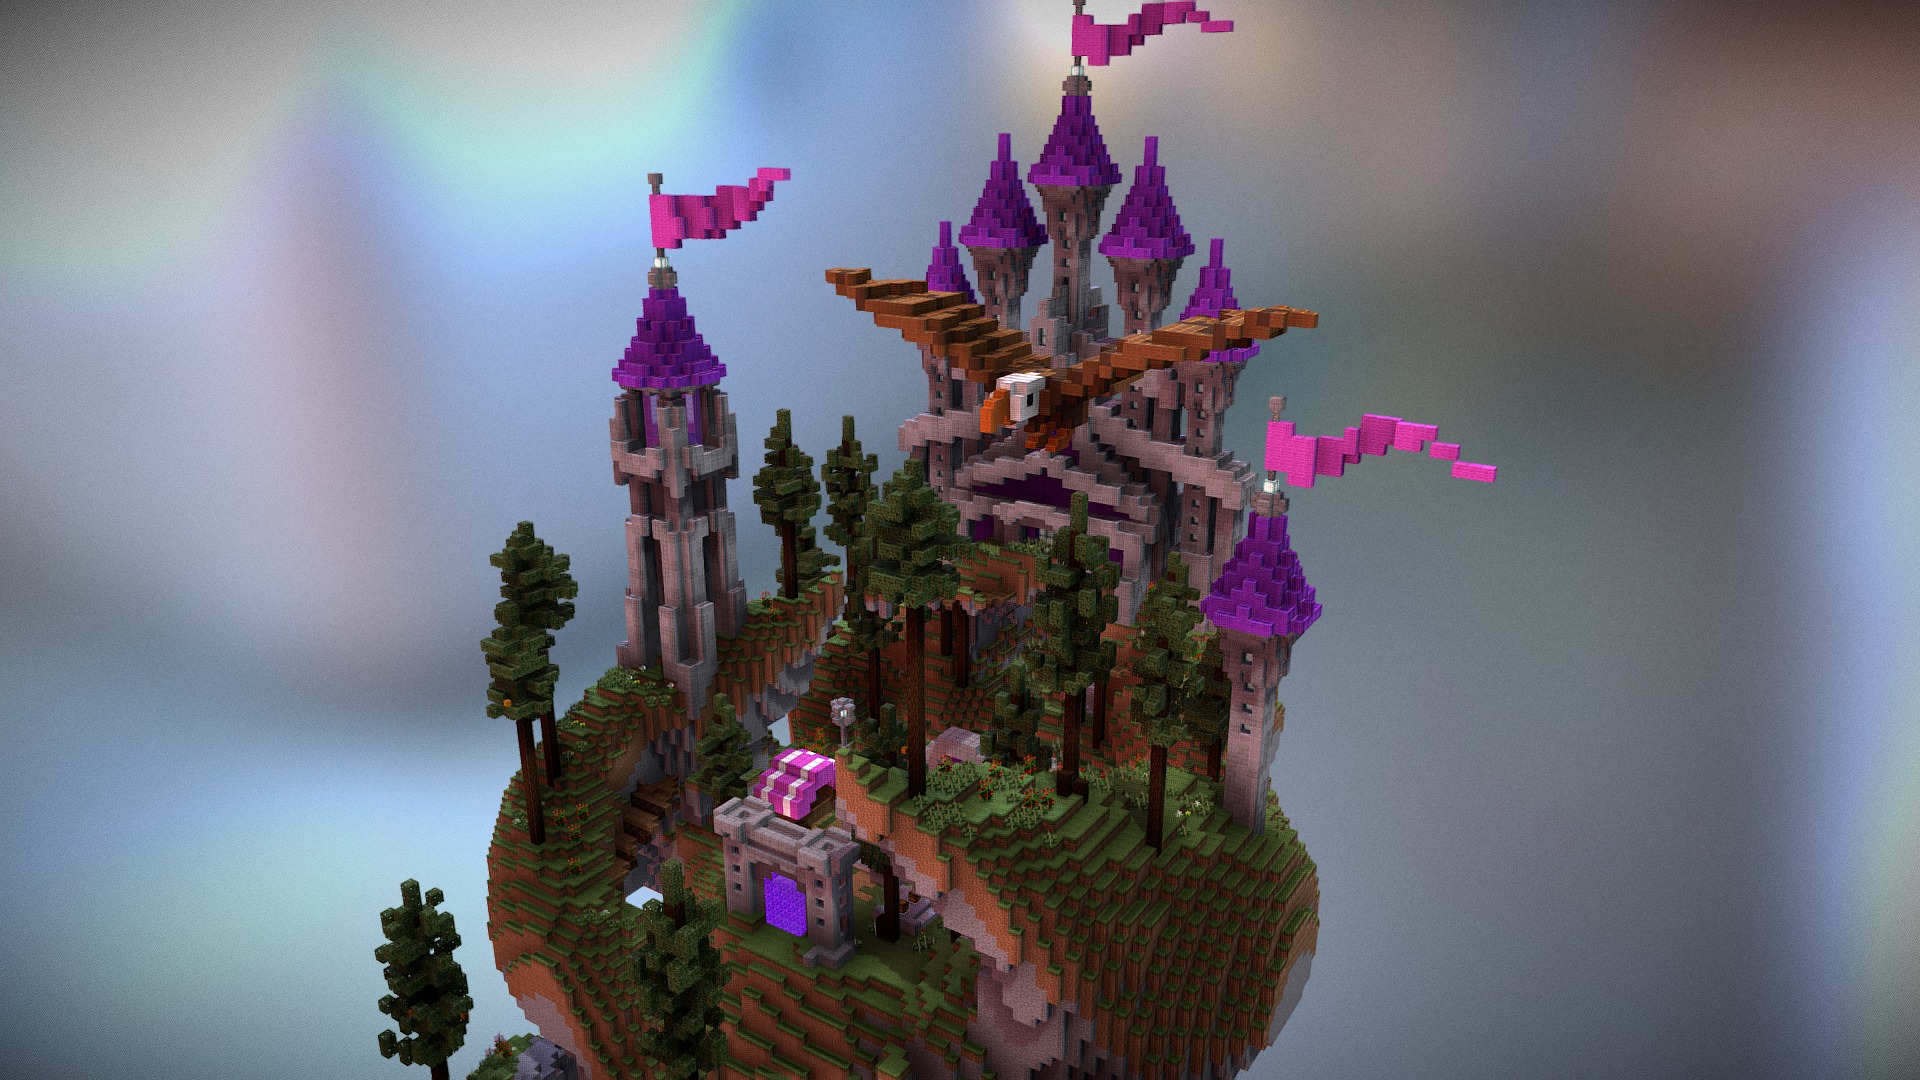 3D model Magica compact Spawn/Lobby - This is a 3D model of the Magica compact Spawn/Lobby. The 3D model is about a colorful castle with trees and a rainbow in the background.